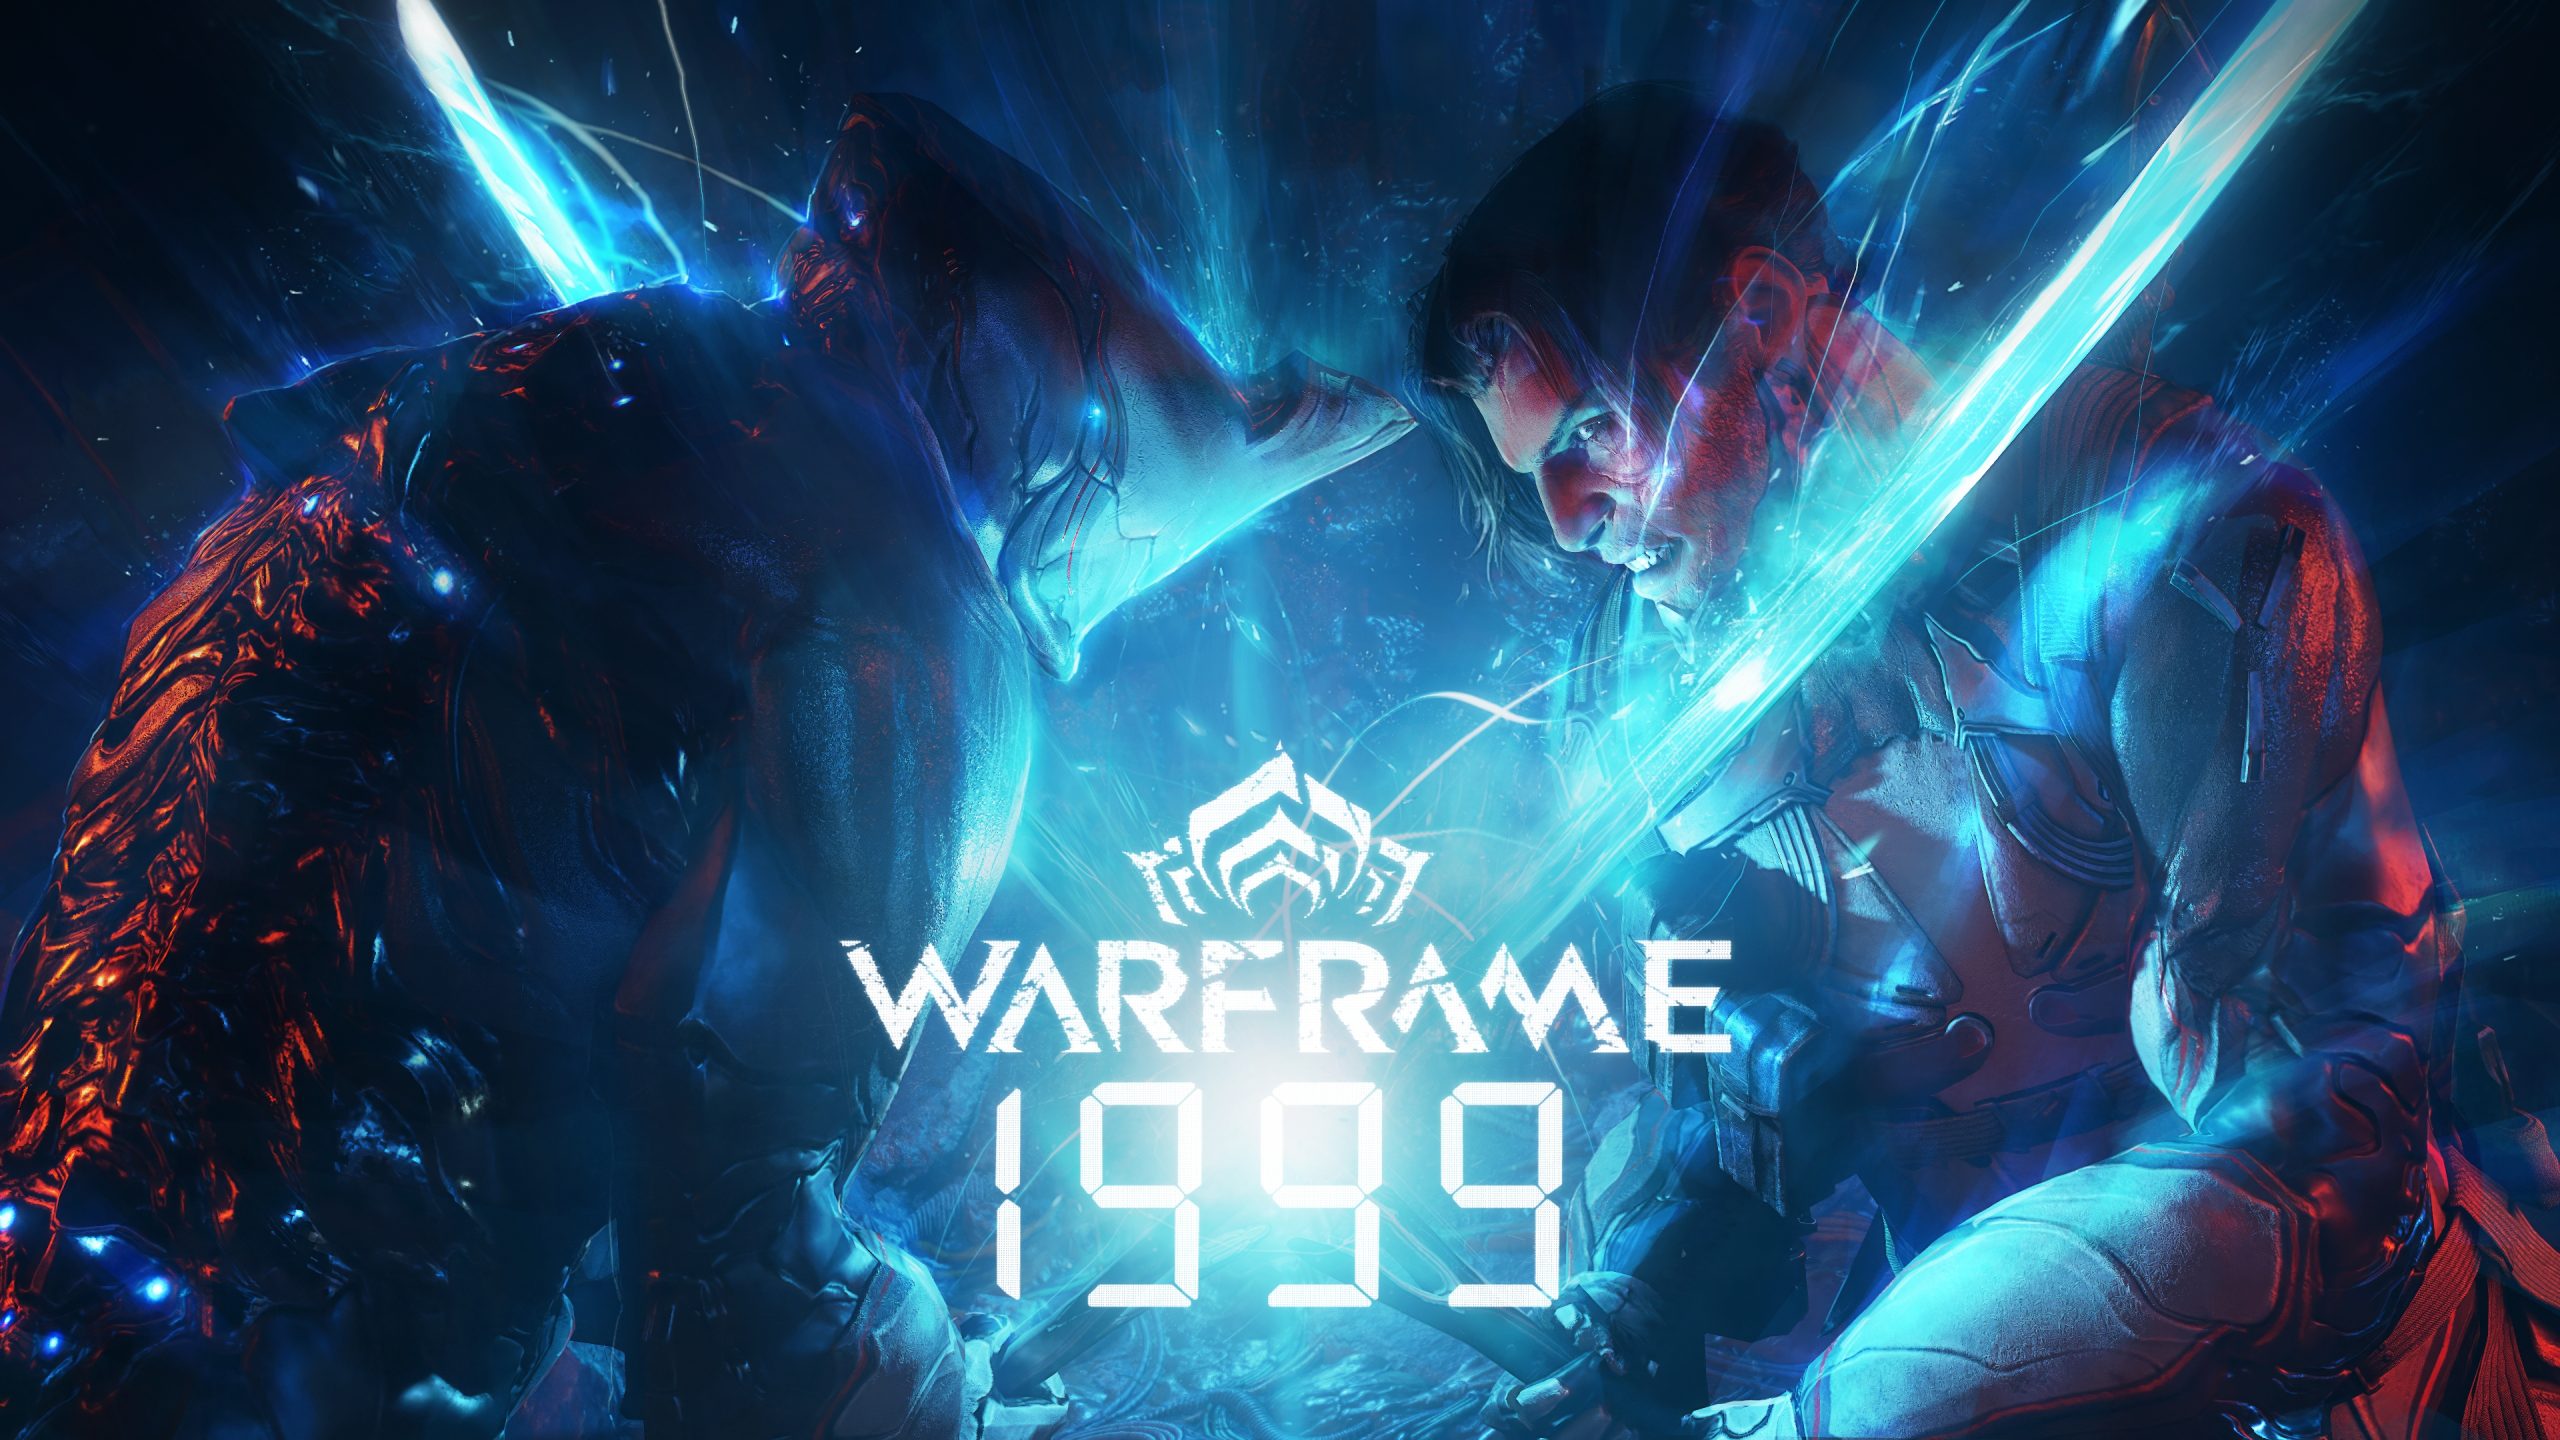 Warframe: 1999 Is Out This Winter, Will Add Romance System